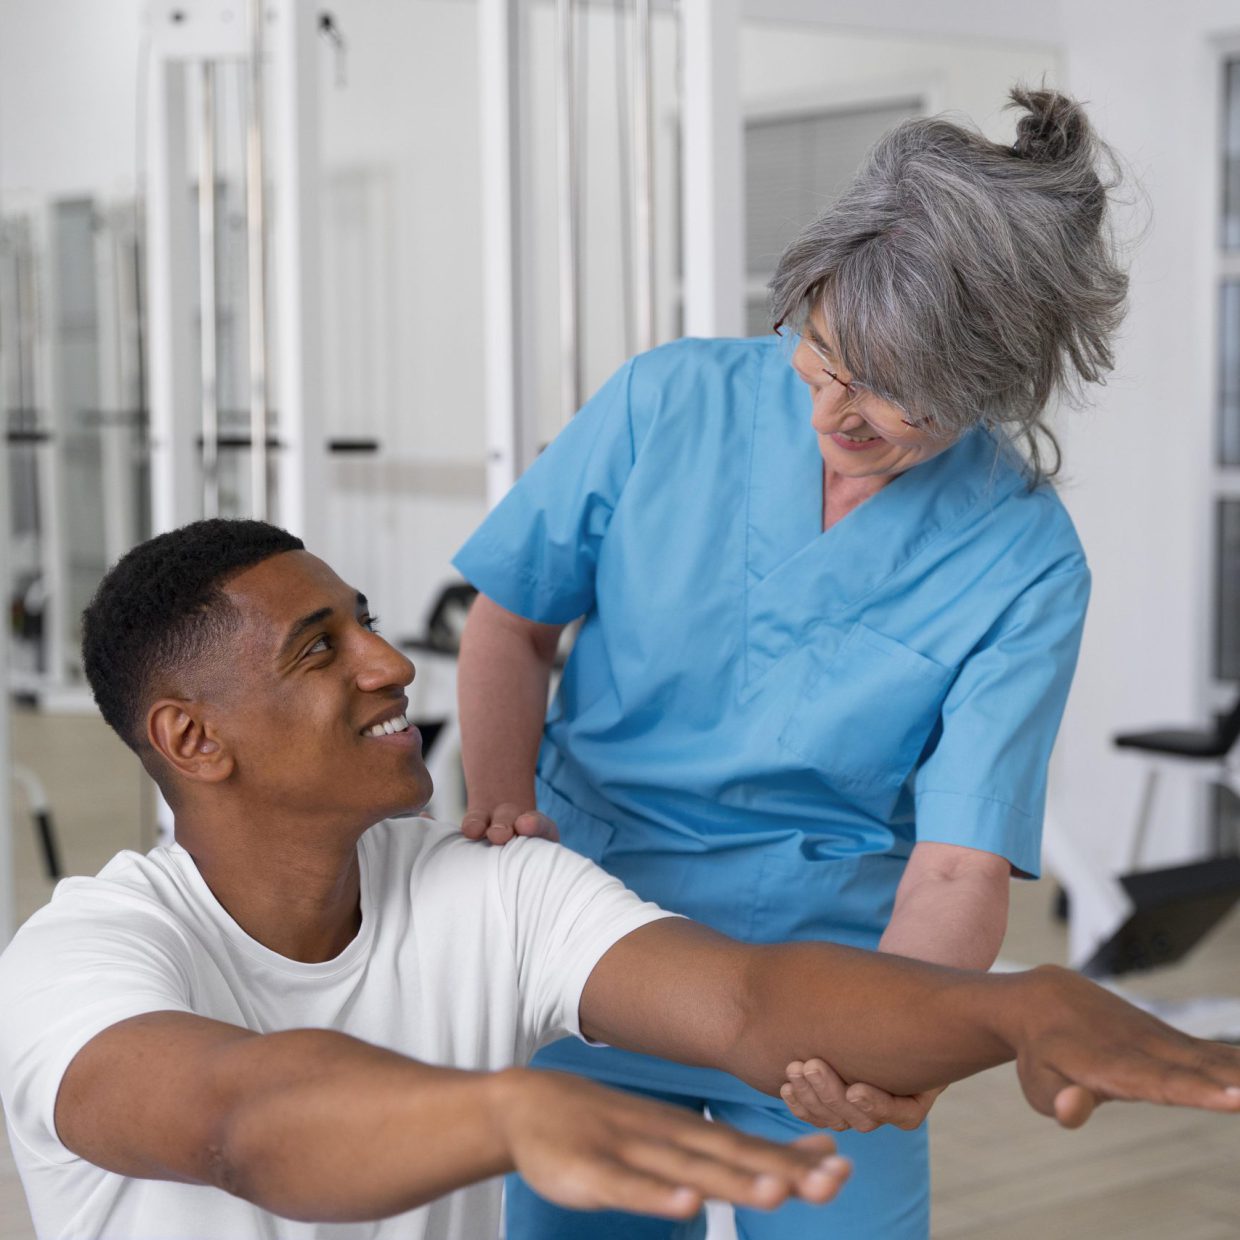 medical-assistant-helping-patient-with-physiotherapy-exercises